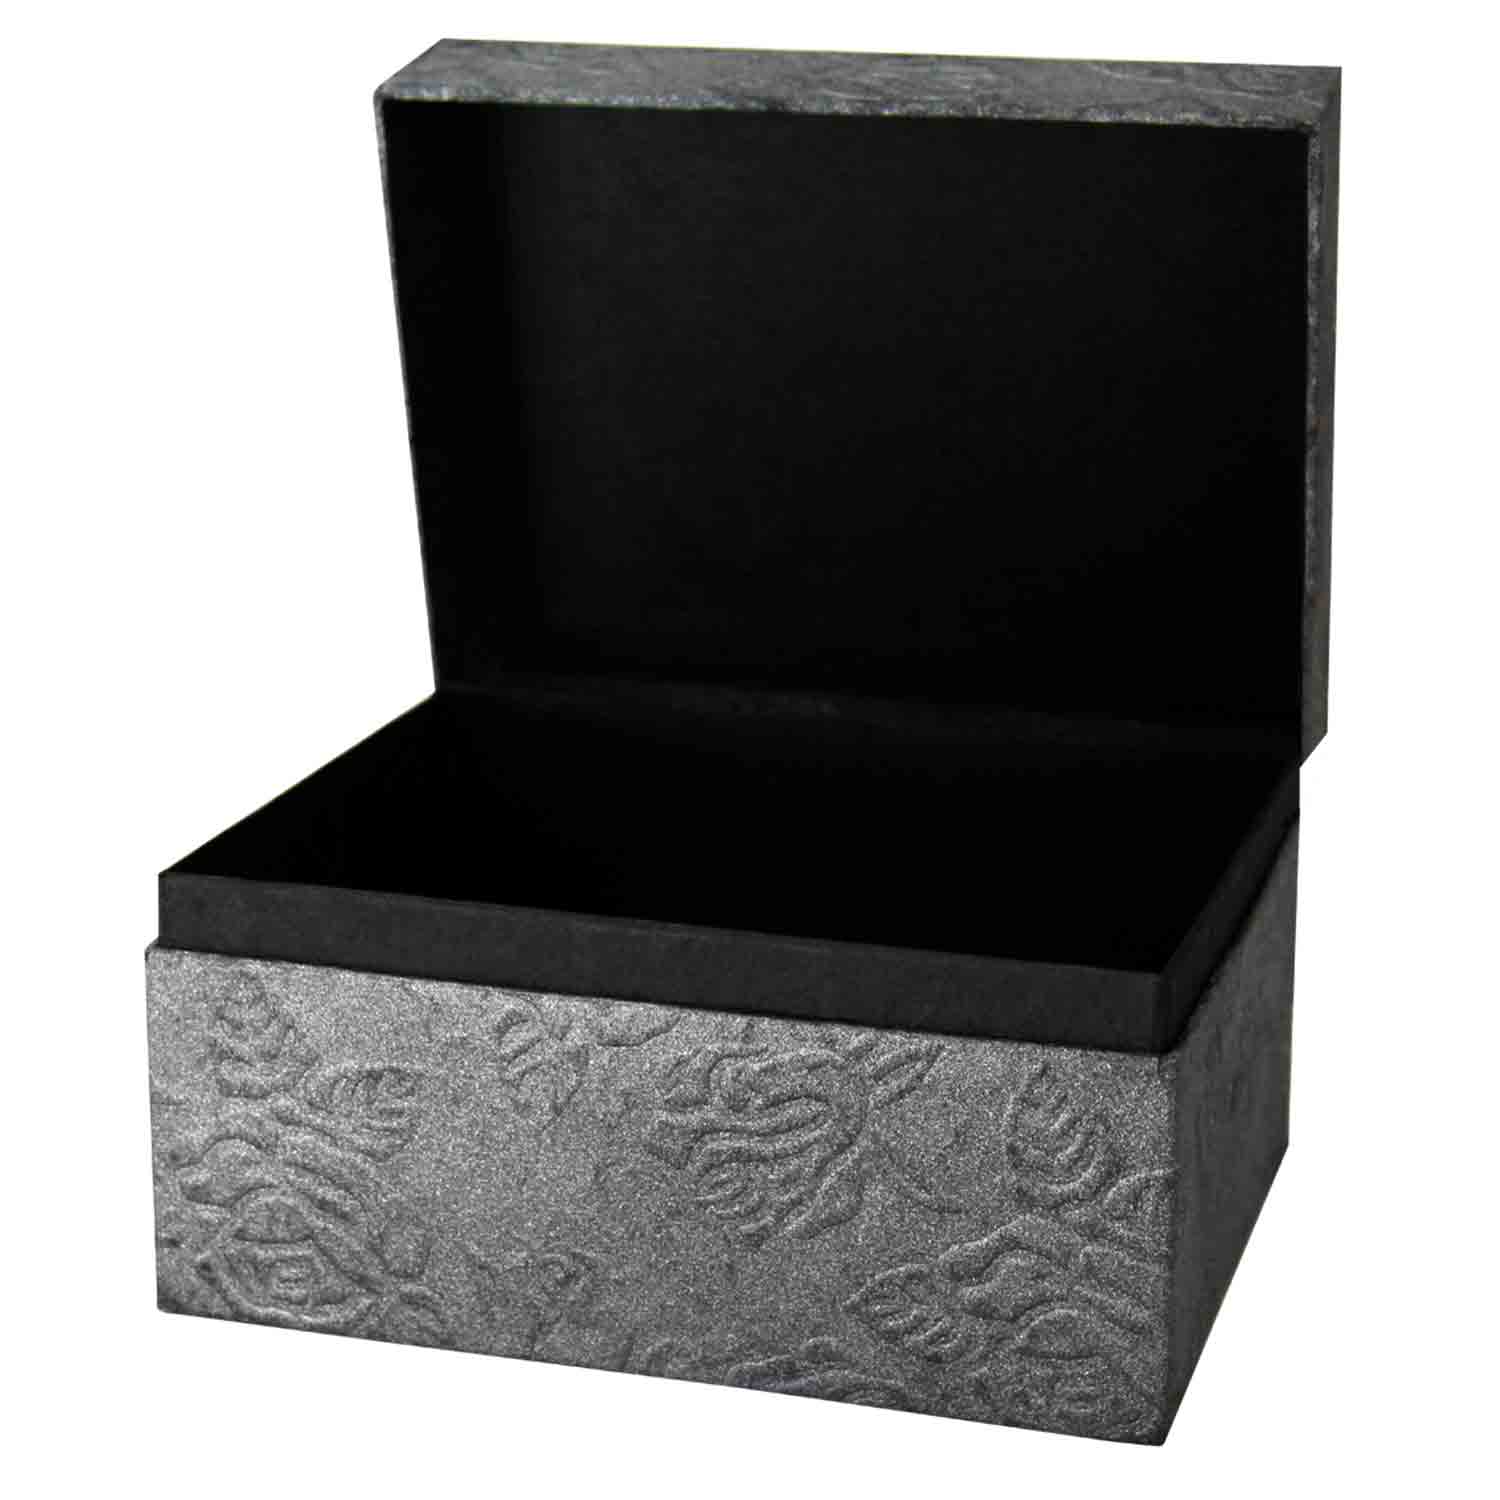 EarthUrn Chest Biodegradable Urn for Ashes in Embossed Black Small Open